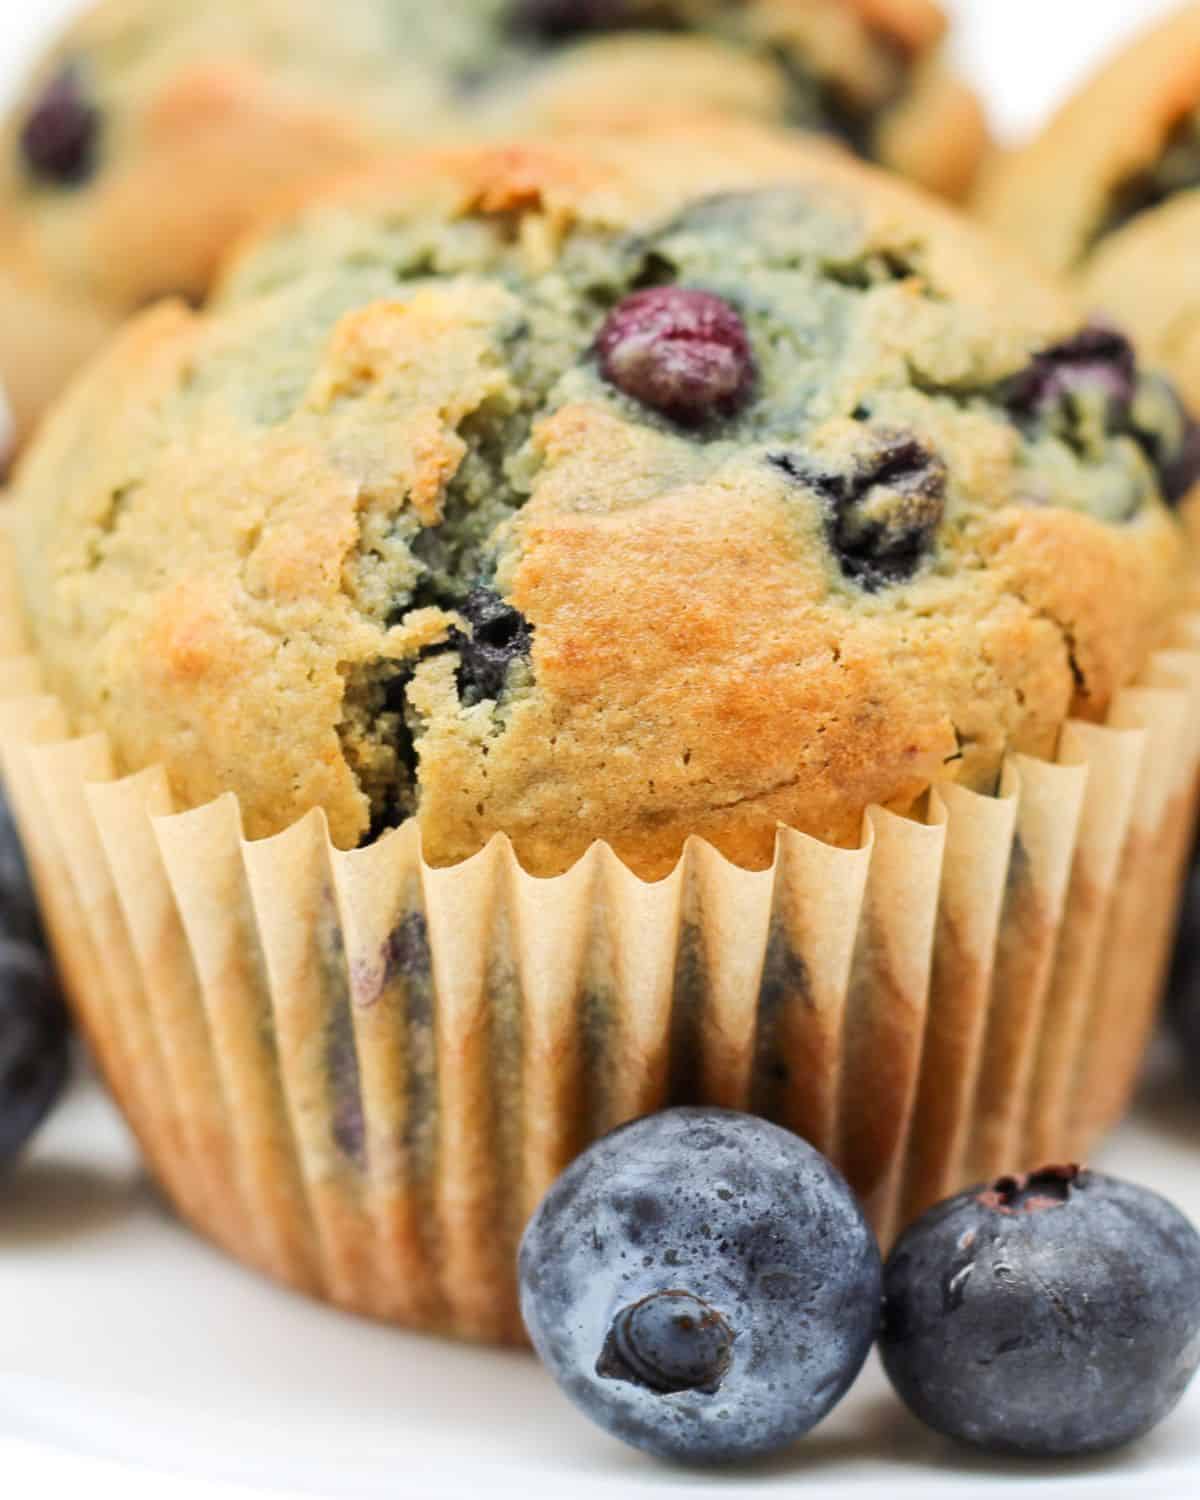 Close-up shot of large golden muffin. It is in a parchment paper liner and there are few fresh blueberries next to it.